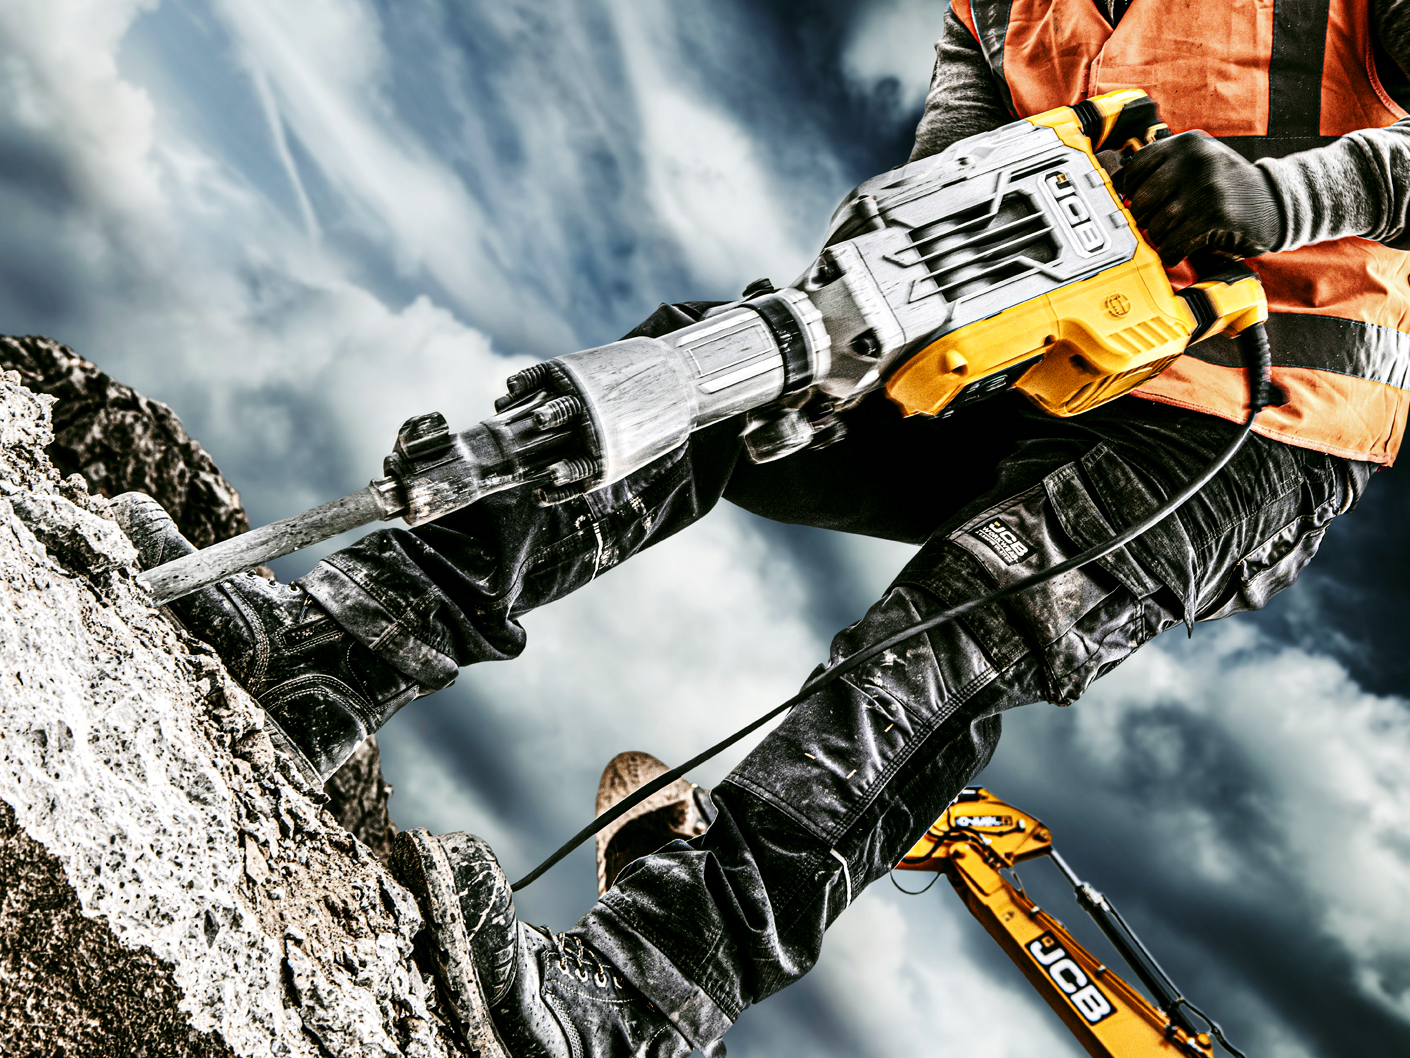 workwer-for-jcb-tools-shot-in-staffordshire